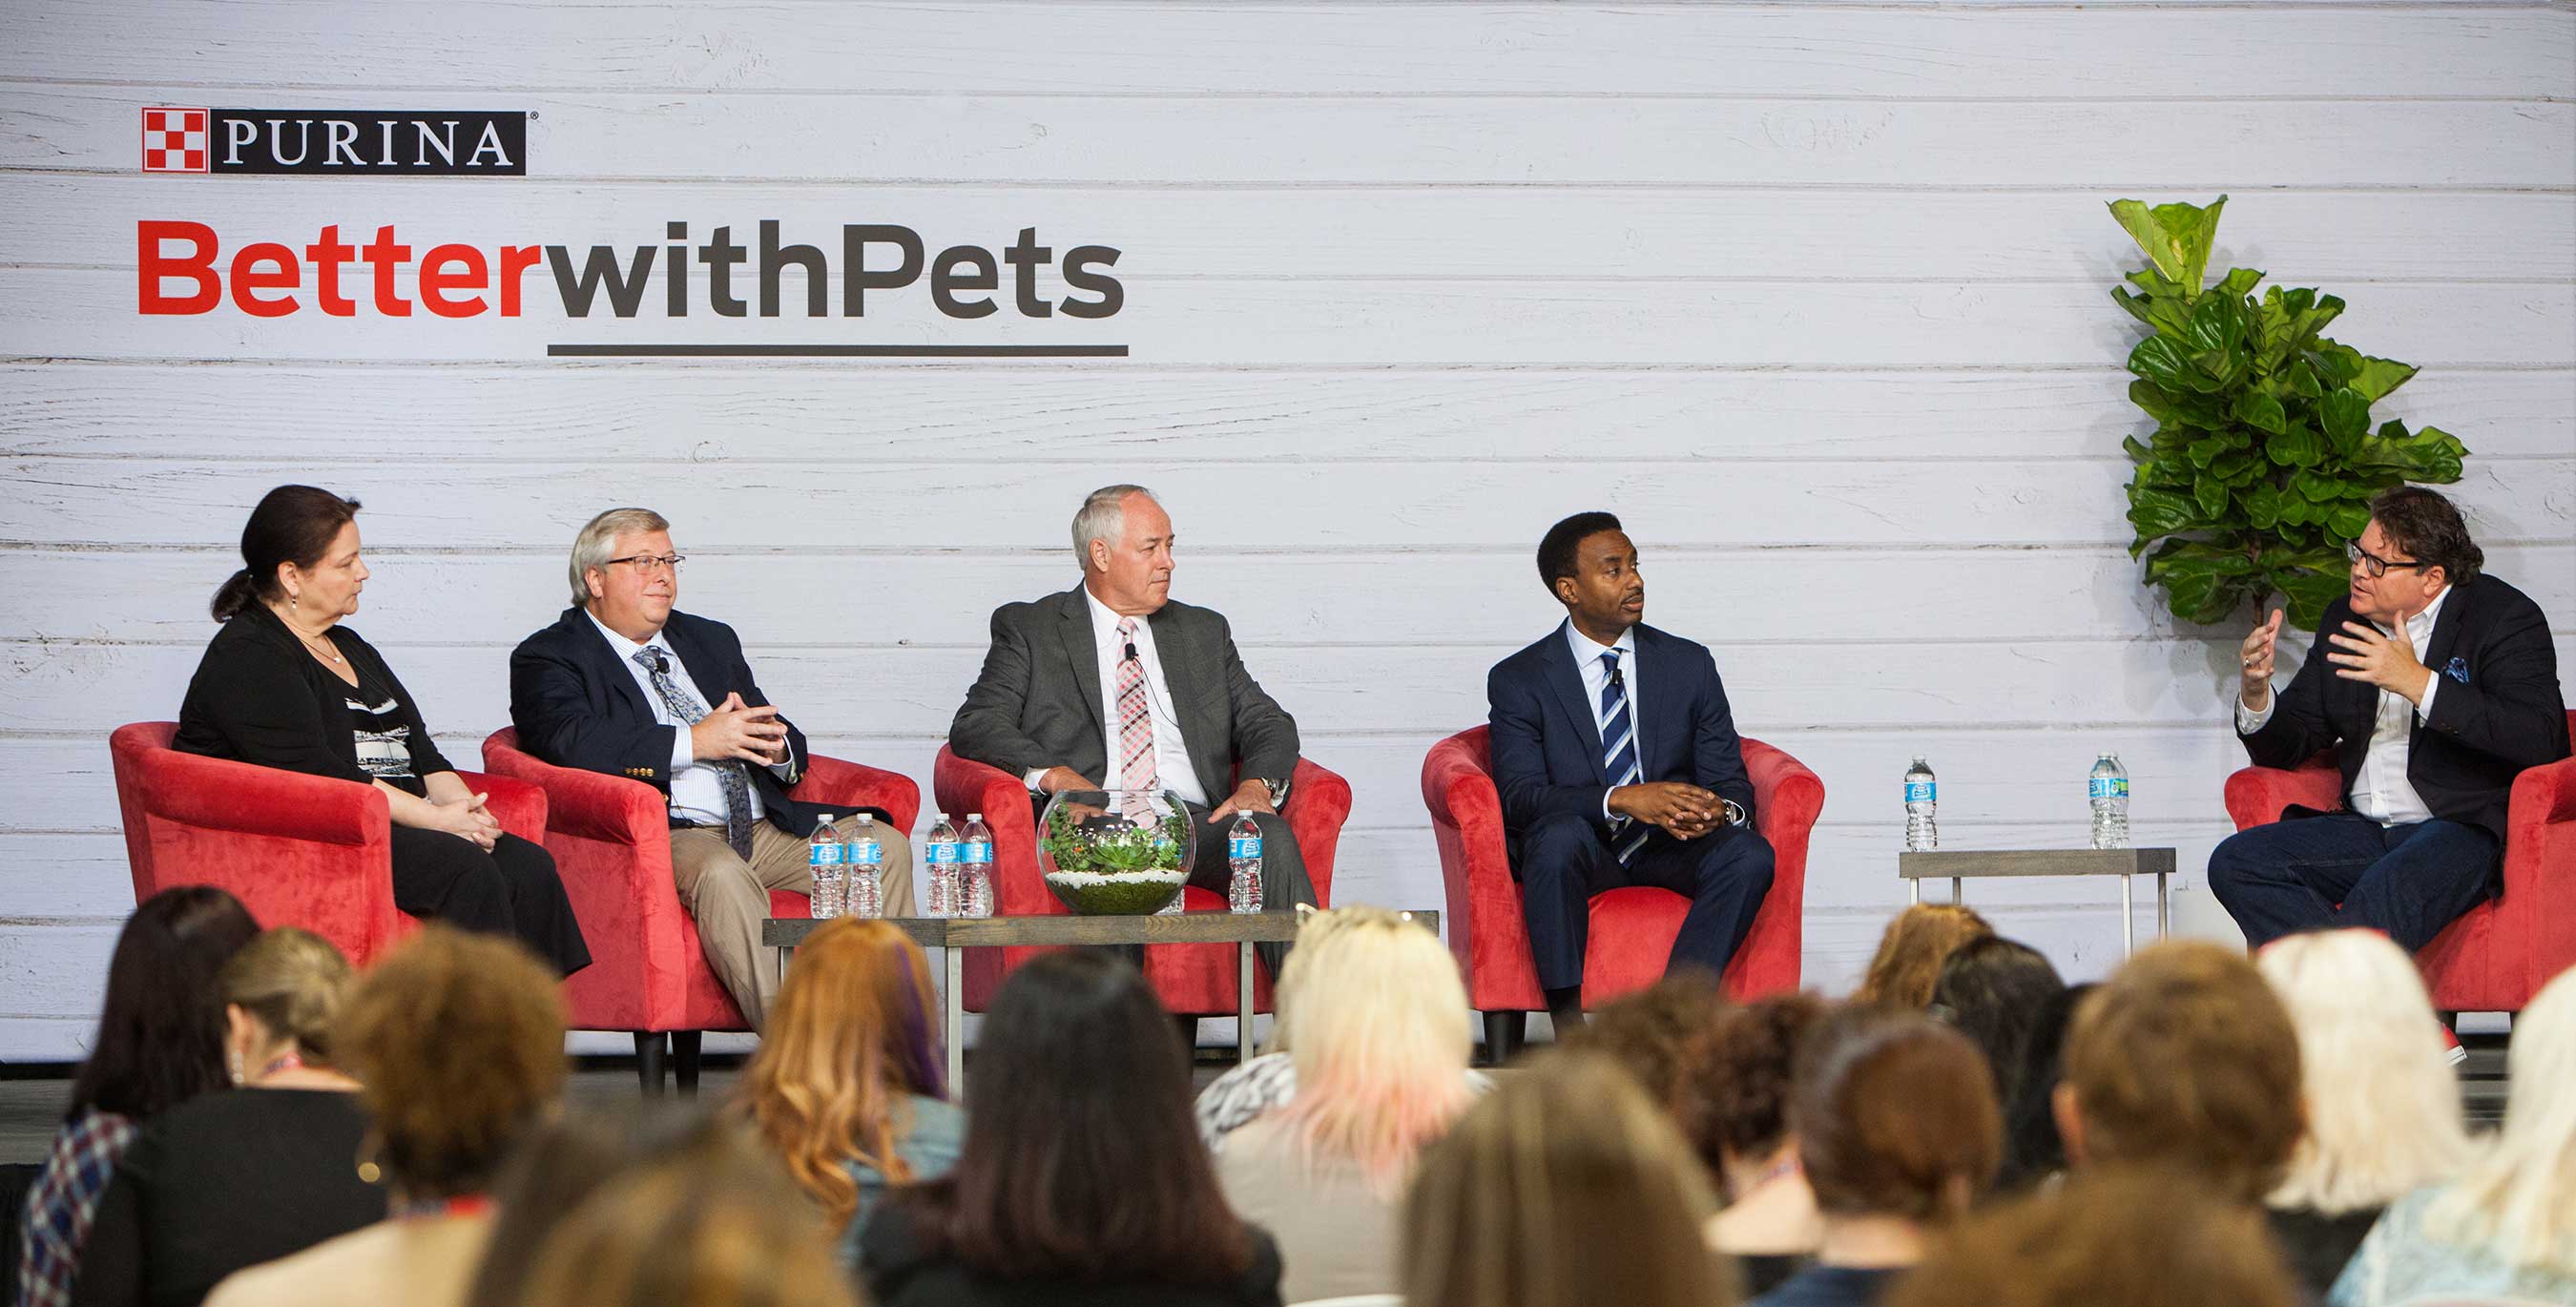 Purina’s fourth annual Better with Pets Summit featured three panel discussions bringing together experts and innovators to explore the future of pet care.